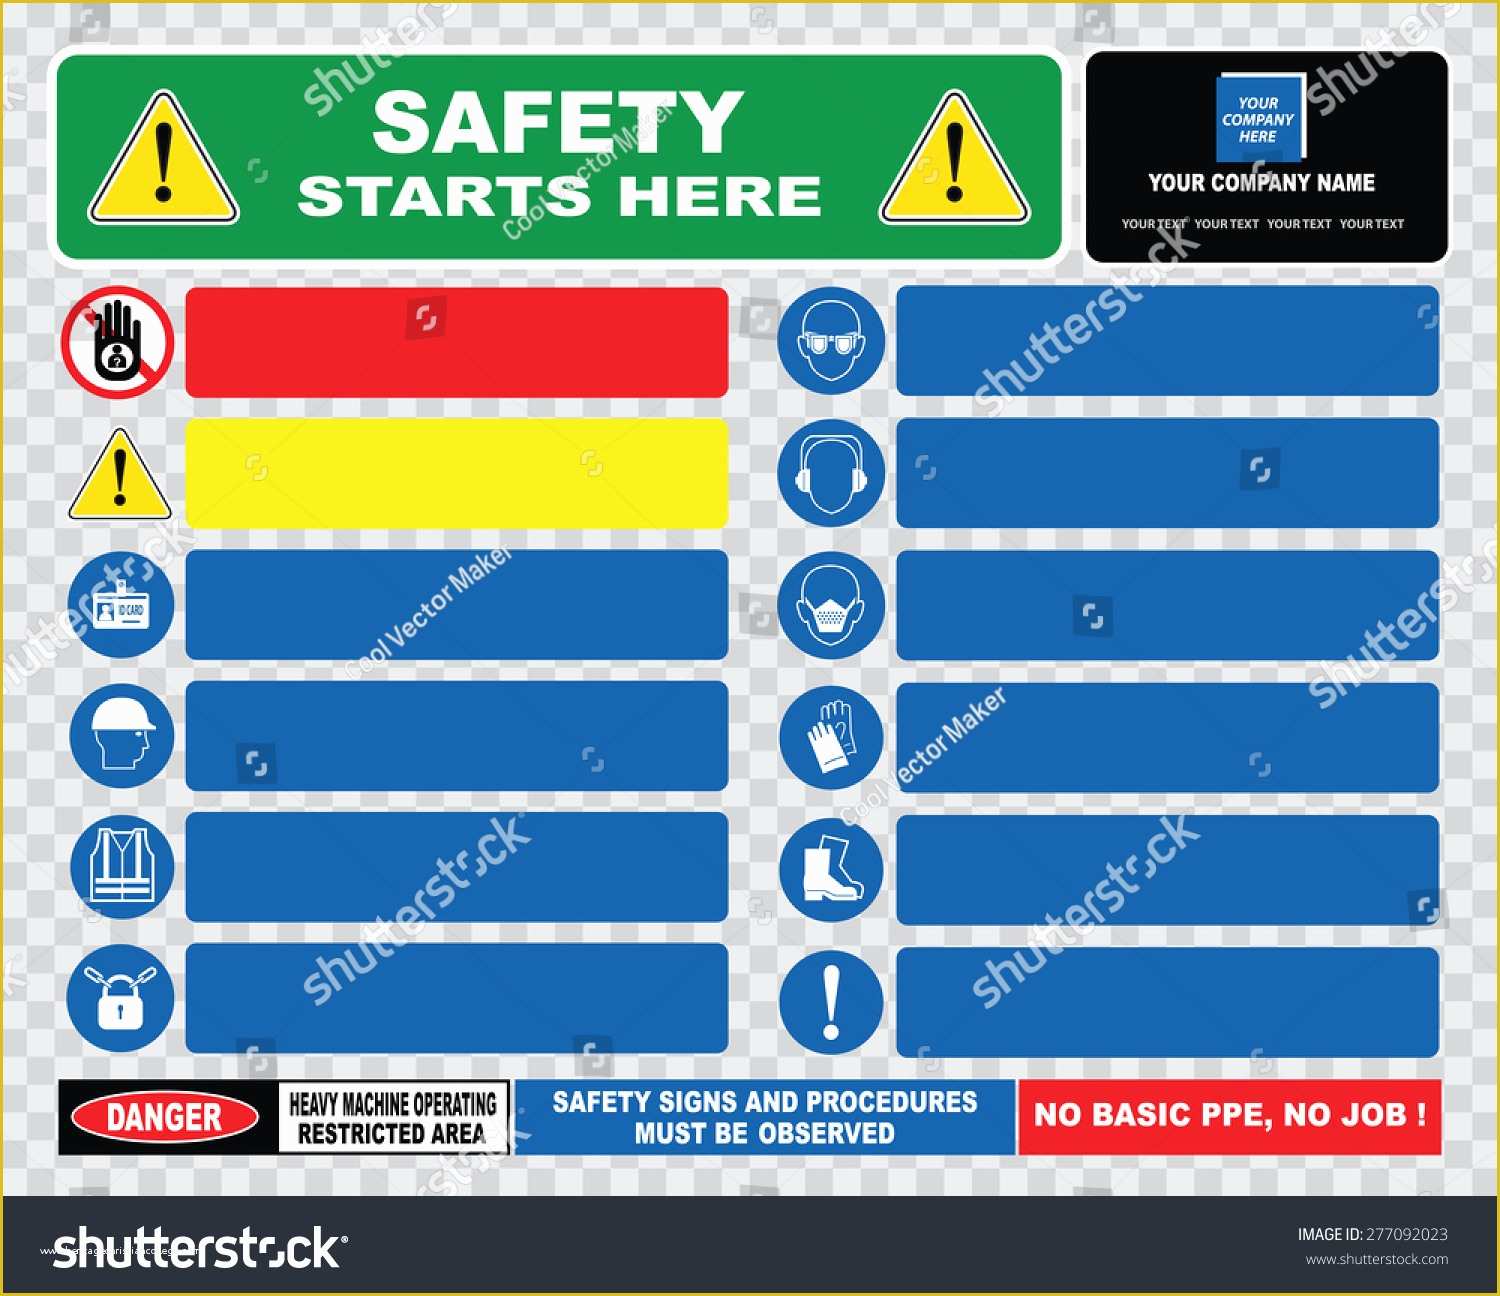 Safety Templates Free Of Safety Starts Here Template Site Safety Stock Vector